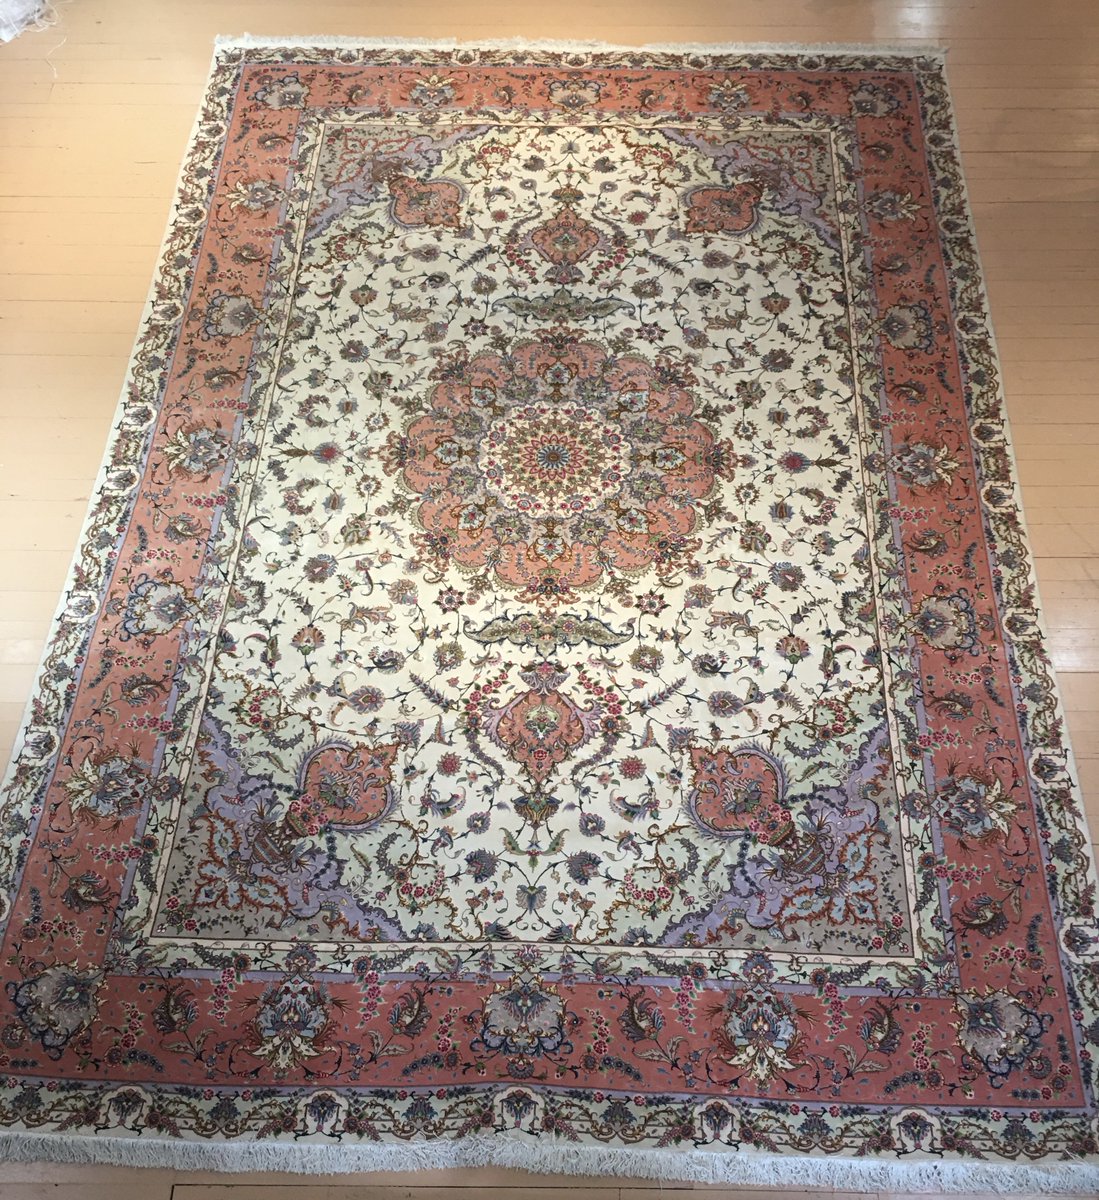 VISIT OUR RUG GALLERY THIS WEEKEND TO SEE NEWEST SHOWINGS! (Easy-free parking/entrance in the rear.) OPEN Sat 10 to 6; Sun 12-5.

parvizianfinerugs.com

#handmaderugs #homedecor #decor #orientalrugs #parvizianrugs #parvizianfinerugs #rugsale #rugexperts #persianrugs #ruggallery